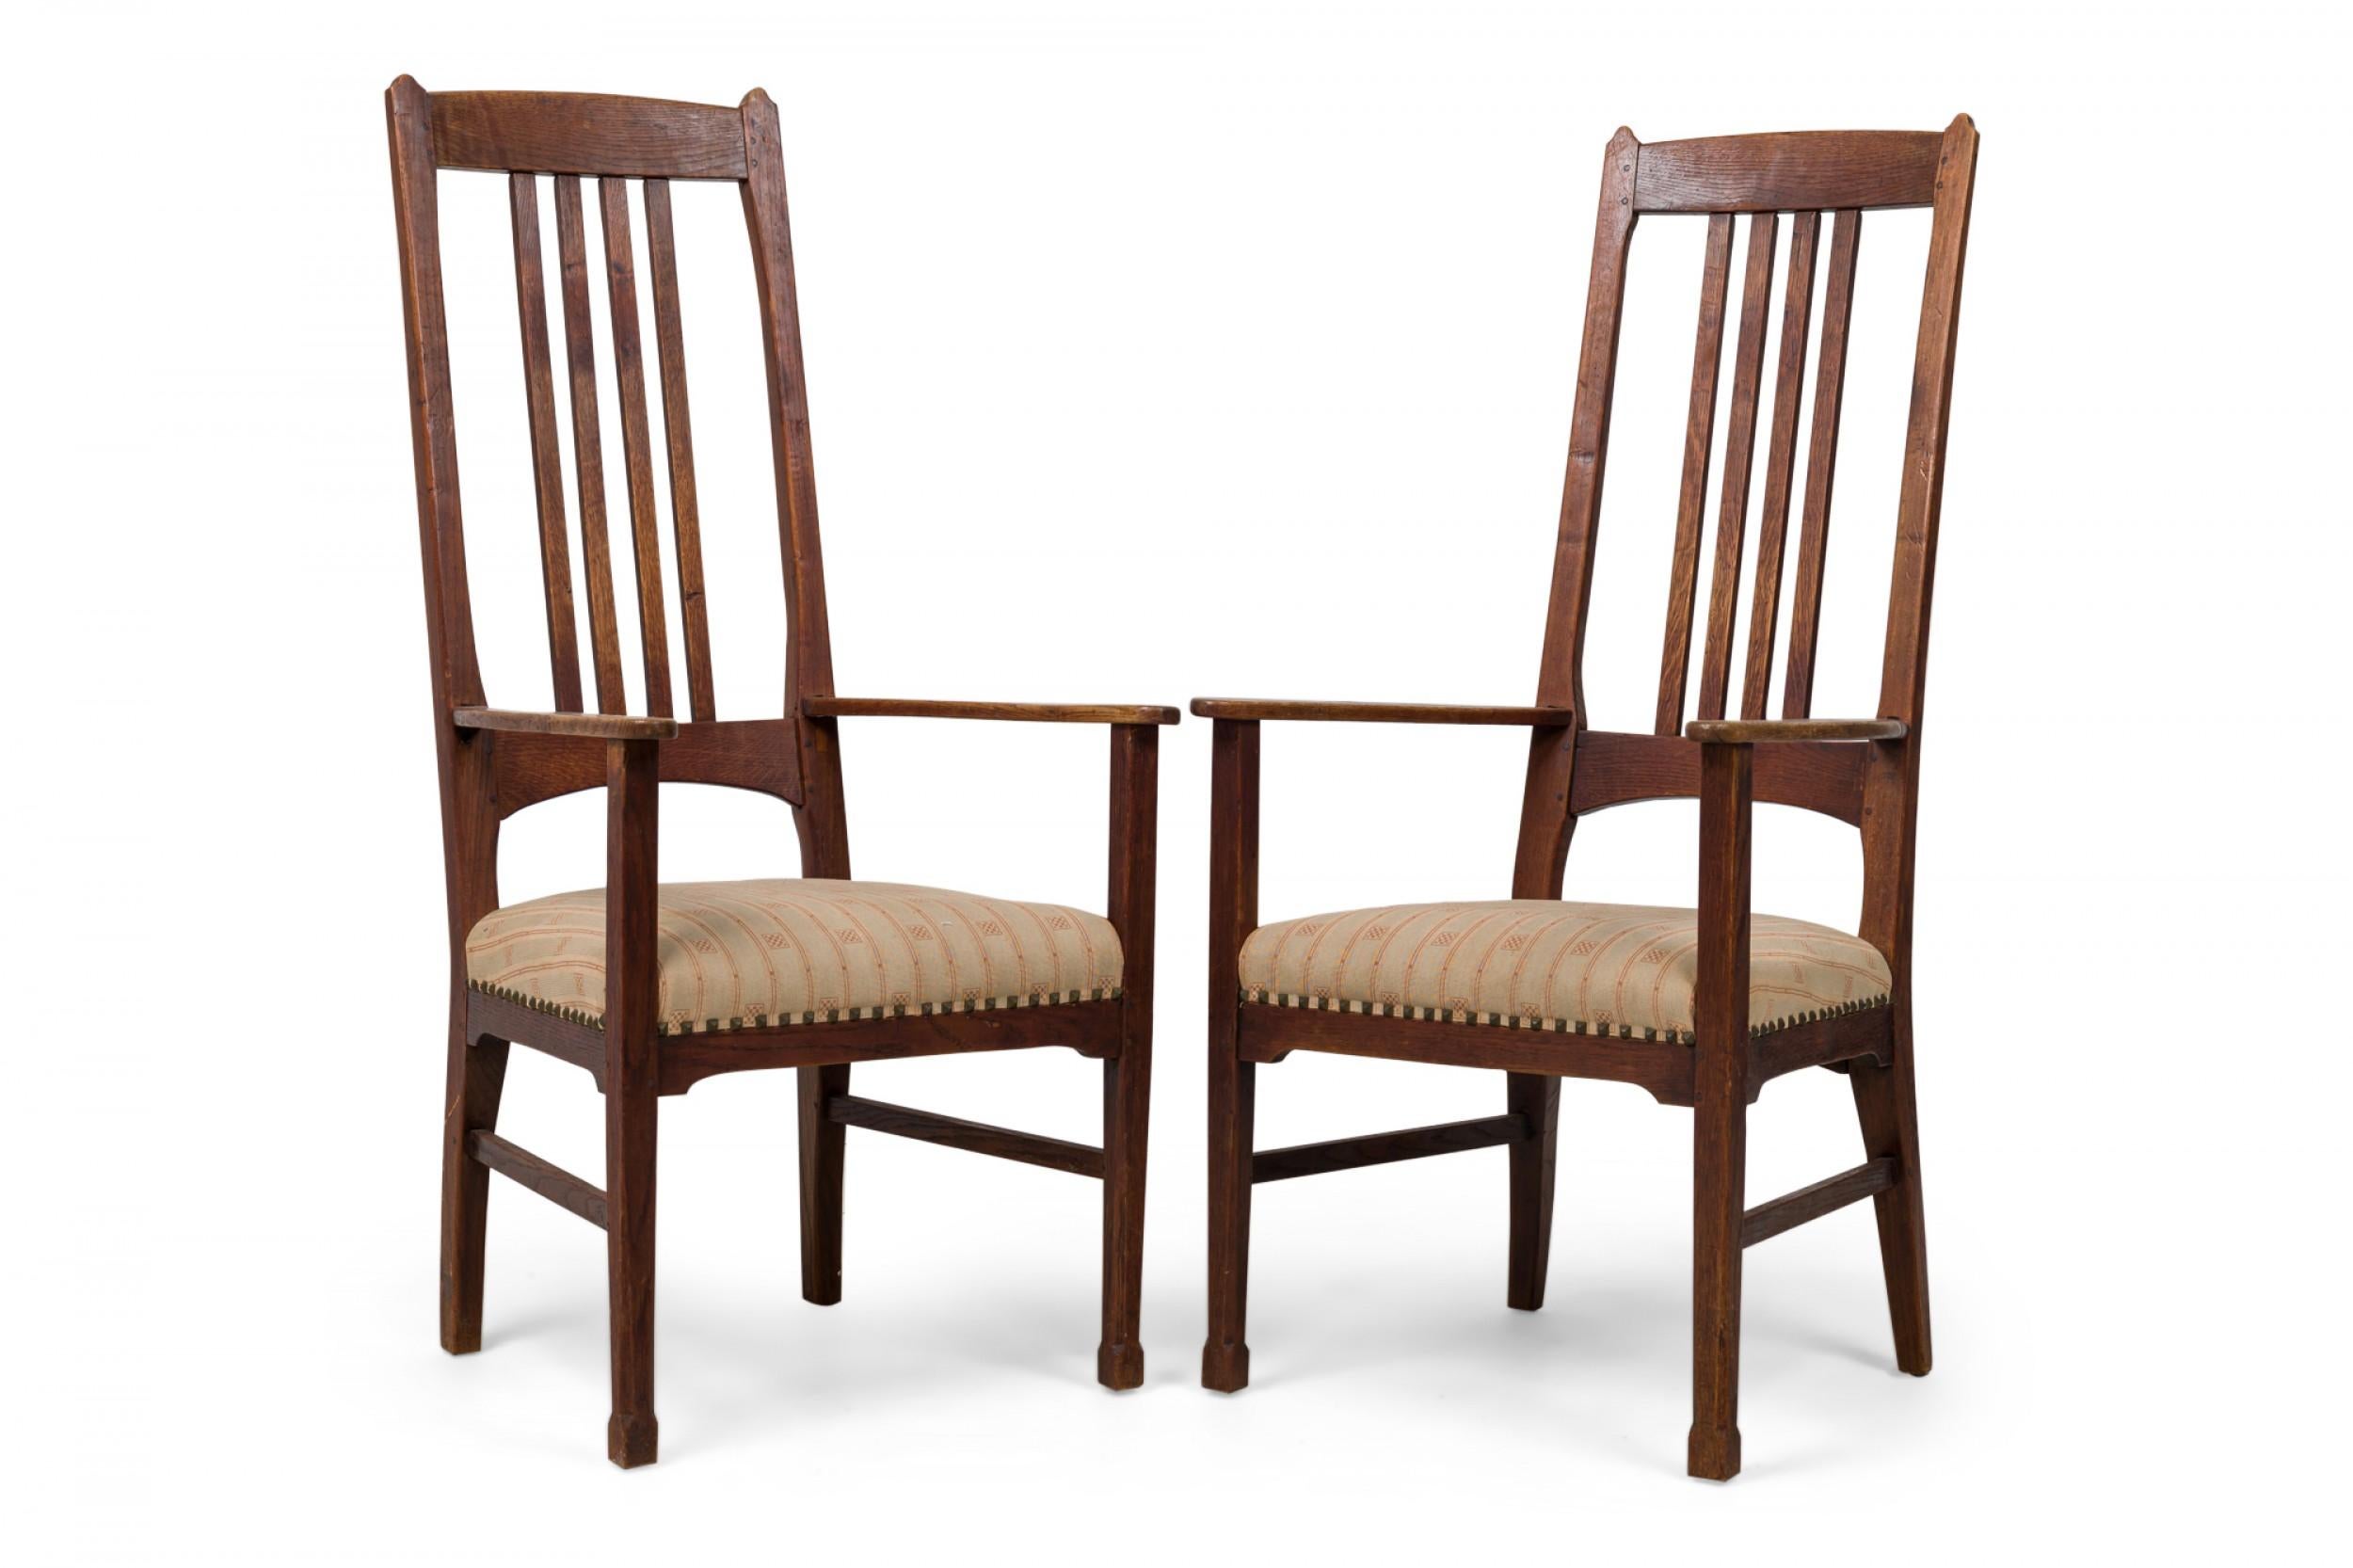 PAIR of English Arts and Crafts high back armchairs with shaped backrest, evenly spaced centered vertical slat supports, flattened arms, beige upholstered seat in a checkerboard striped pattern, square brass nailhead trim, shaped cut out apron and